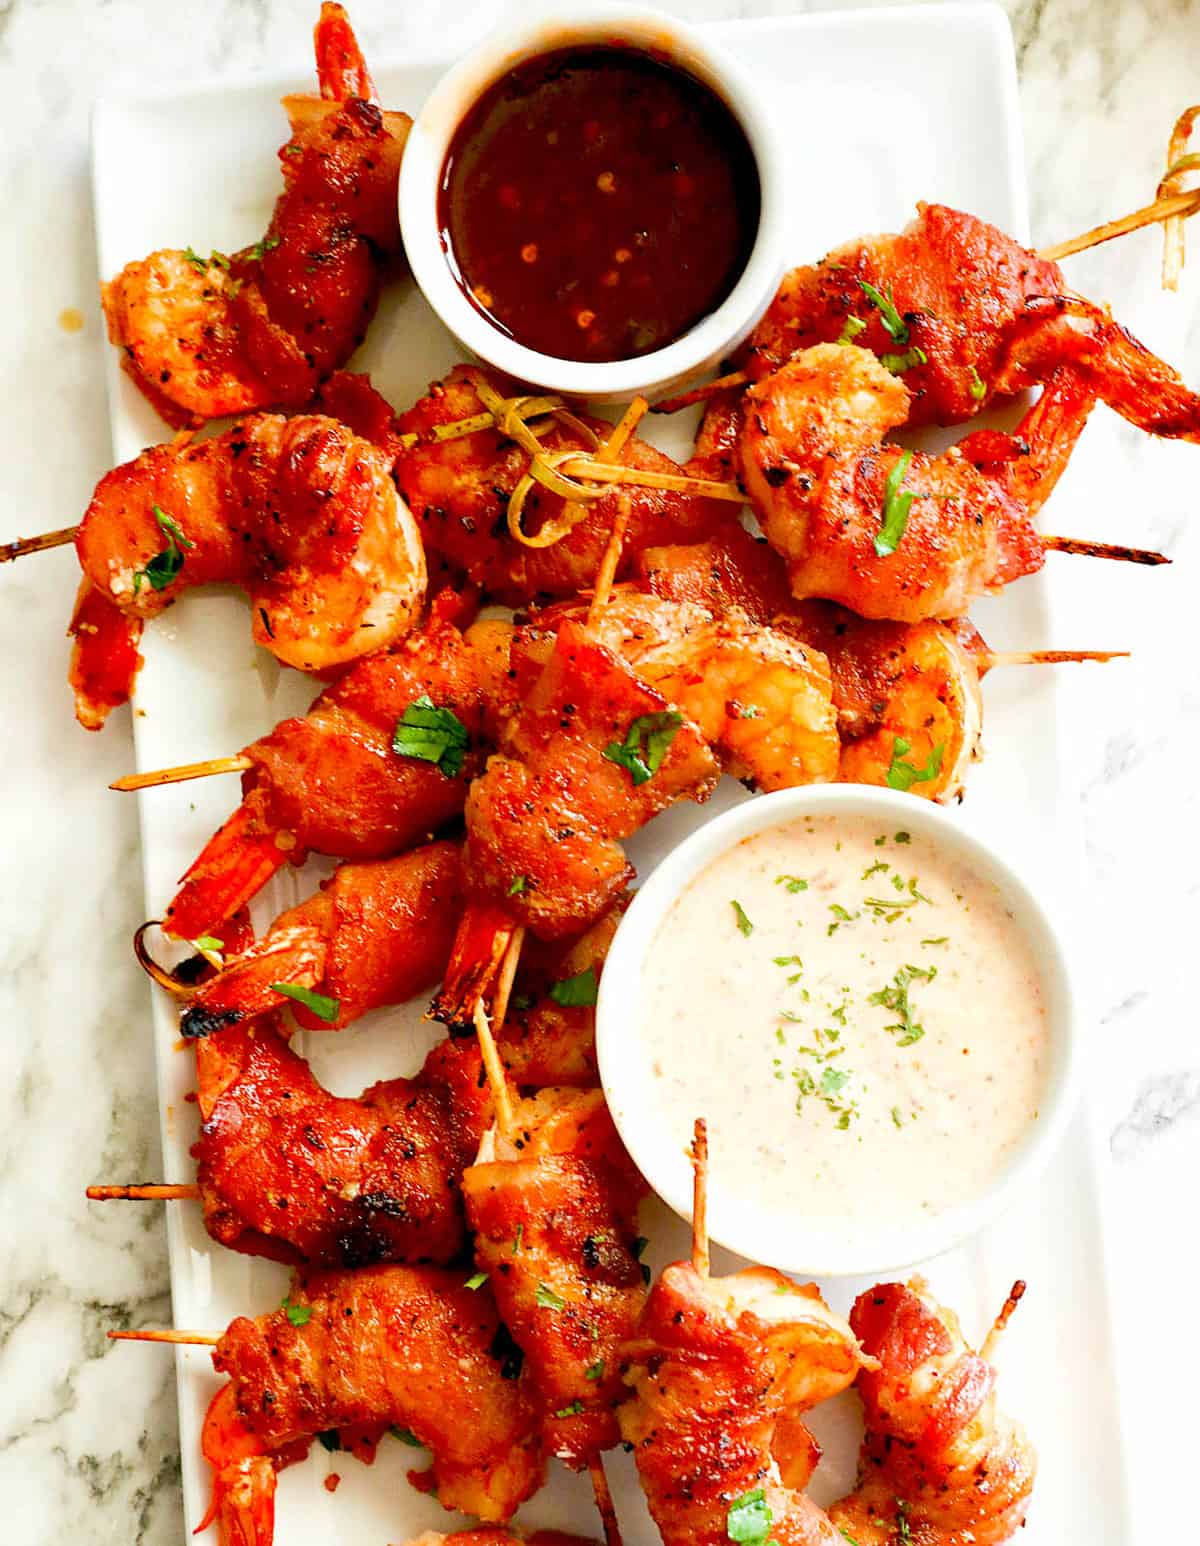 A platter of delicious bacon-wrapped shrimp with remoulade and hot sauce